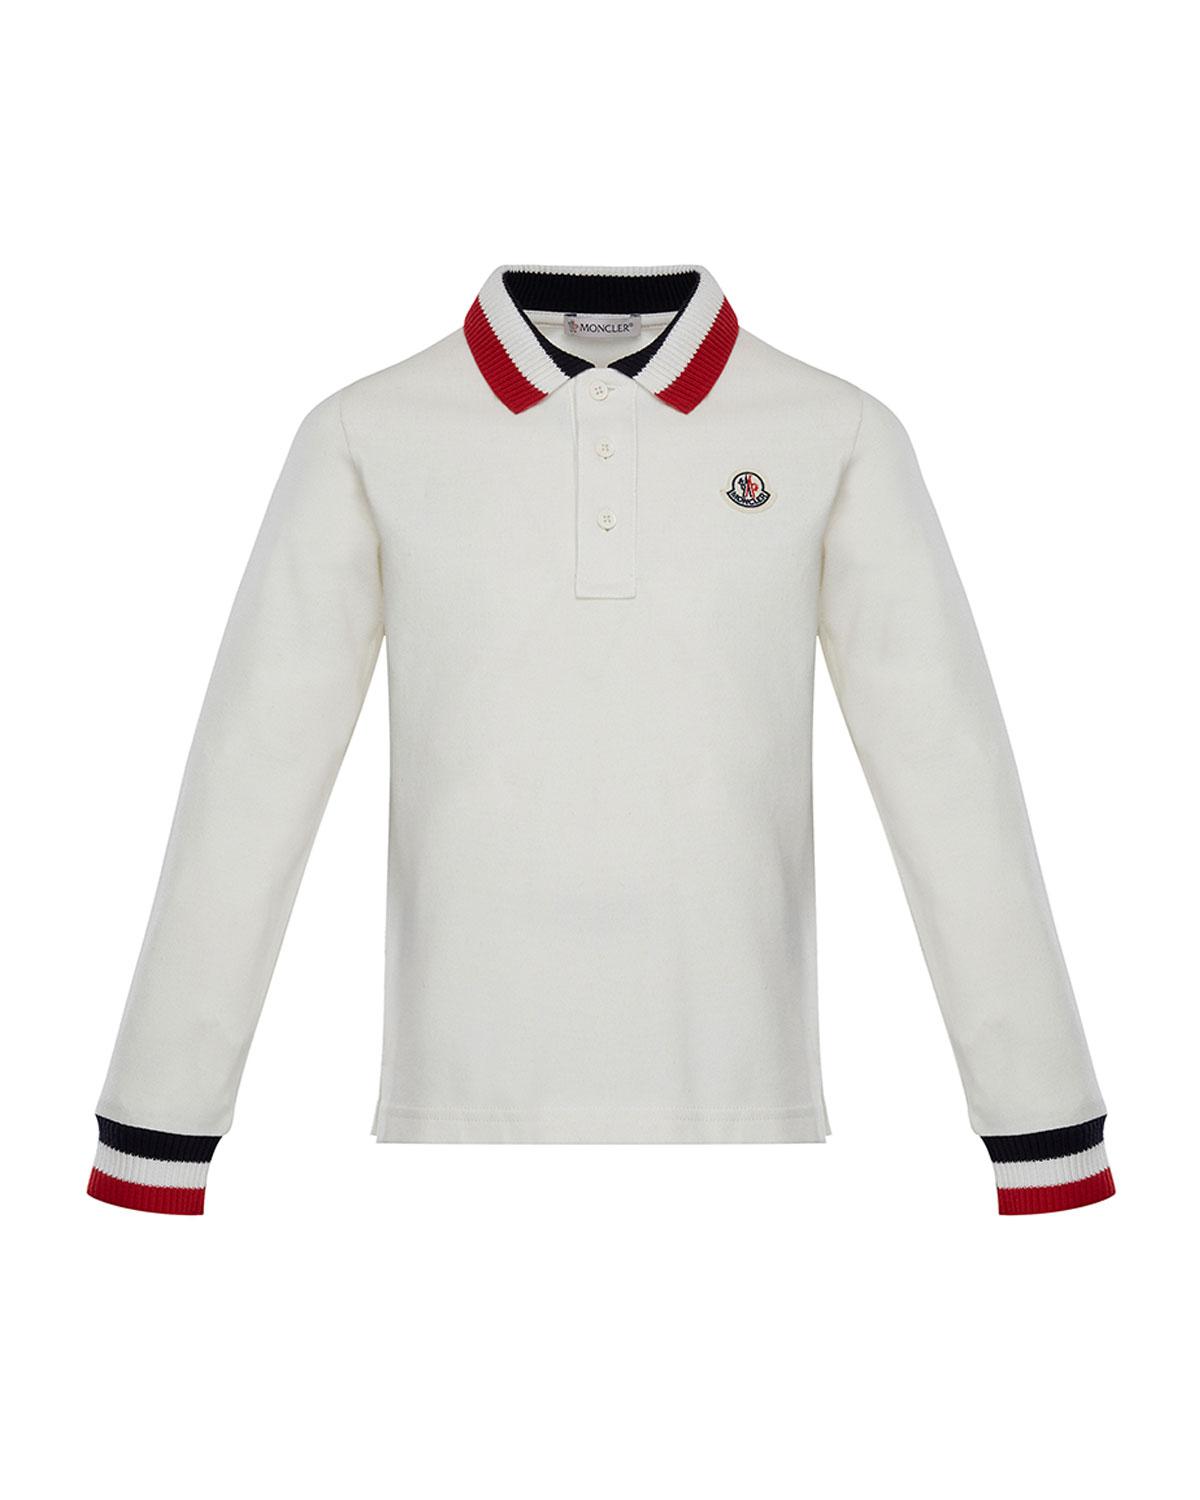 Moncler Maglia Long-sleeve Polo Shirt in White for Men - Lyst